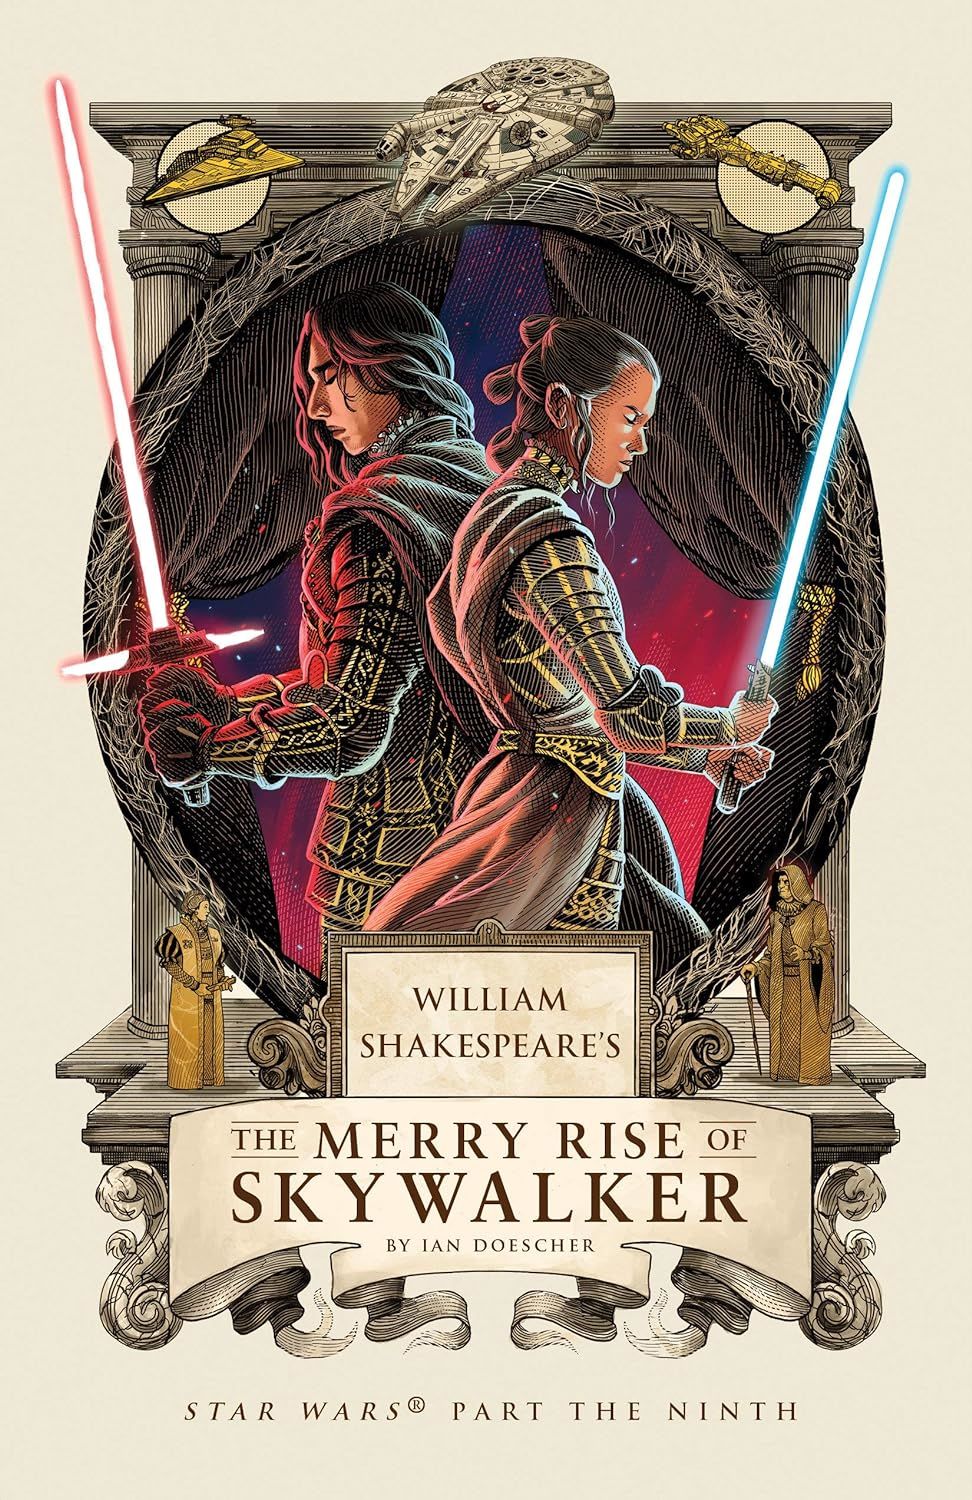 William Shakespeare's the Merry Rise of Skywalker: Star Wars Part the Ninth